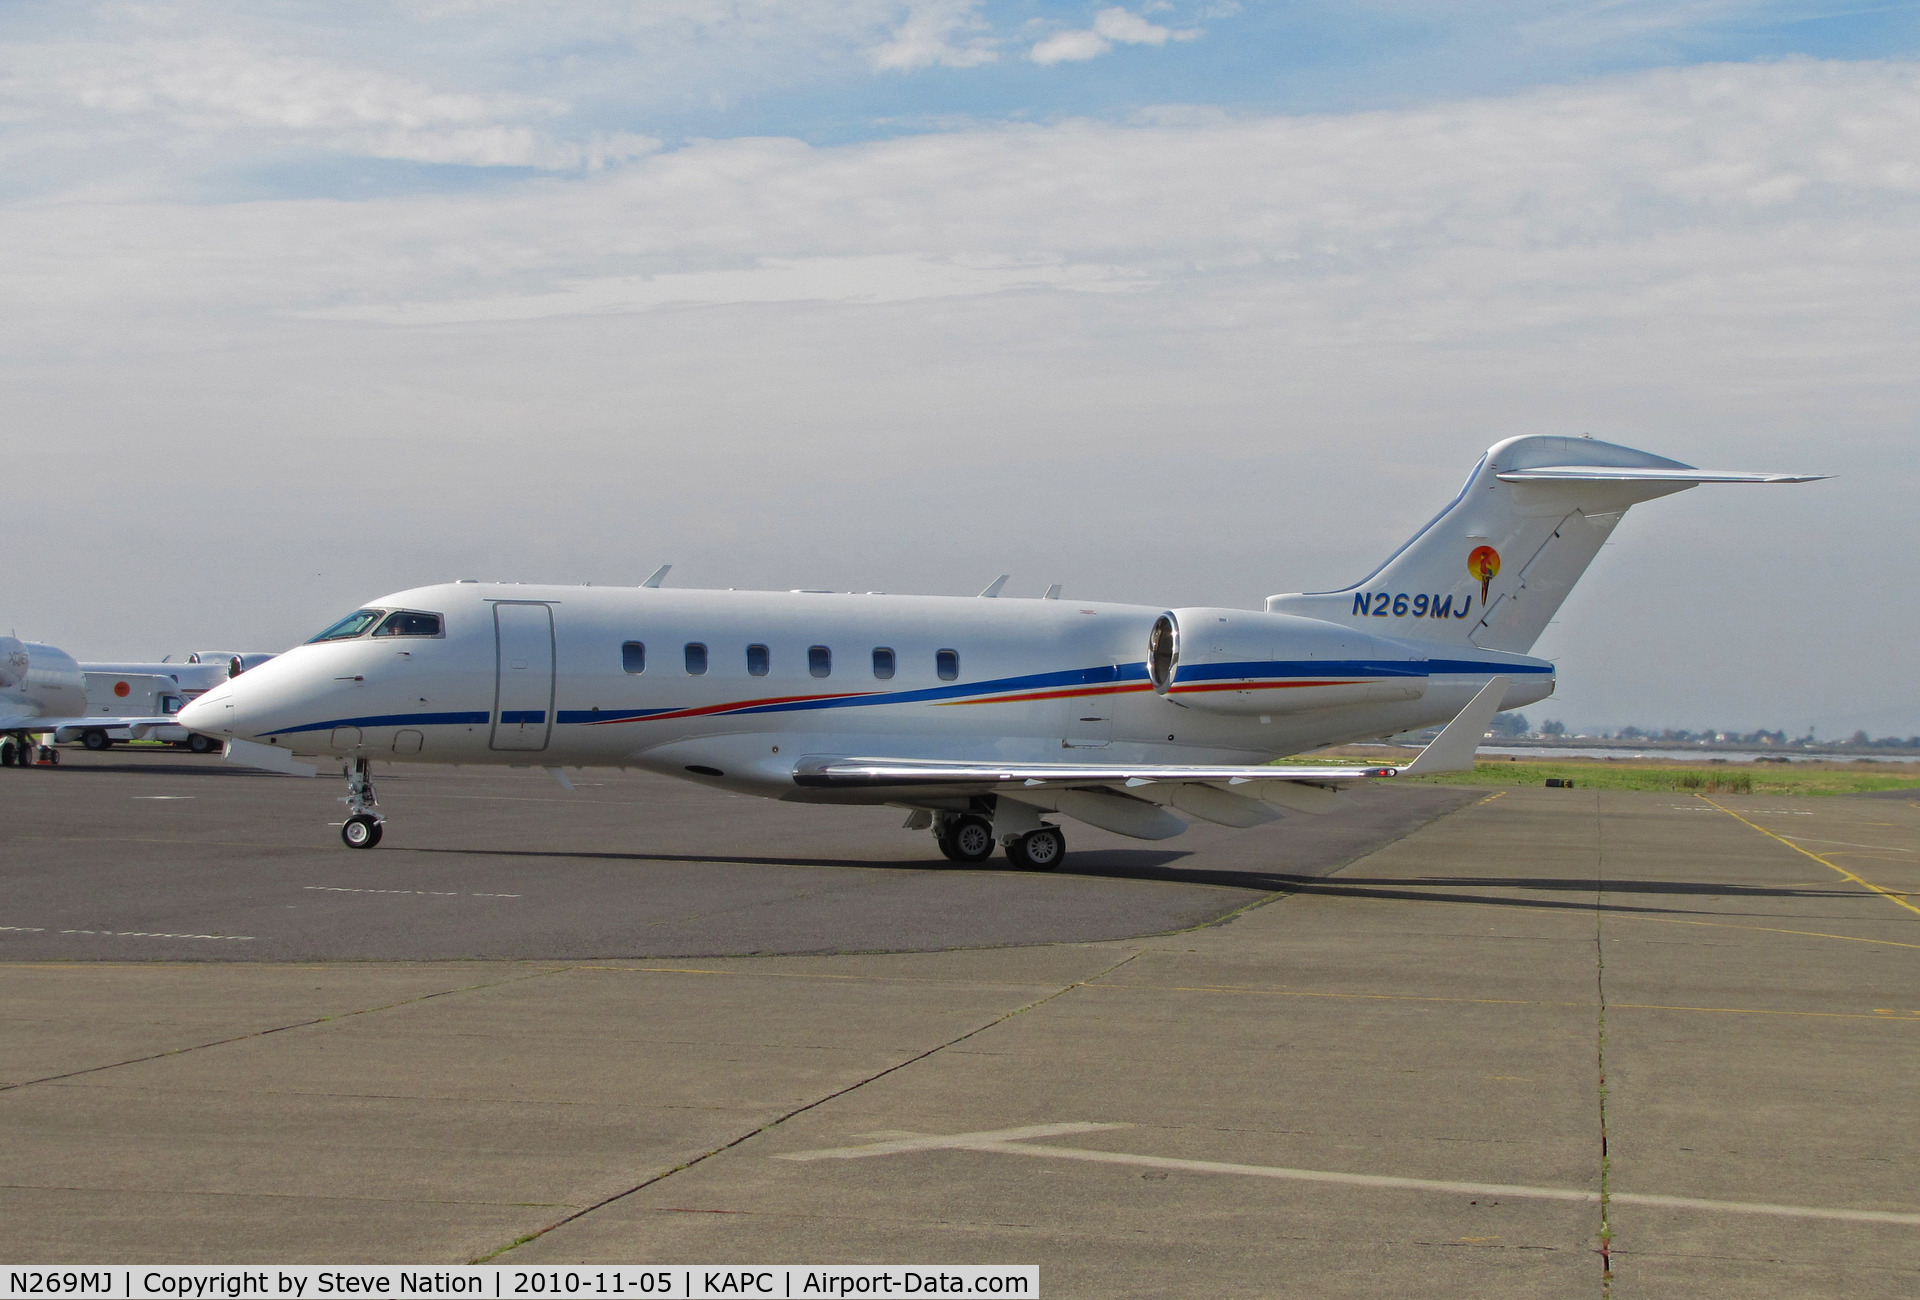 N269MJ, 2007 Bombardier Challenger 300 (BD-100-1A10) C/N 20180, Maui Jim Inc. (Peoria, IL!) 2007 Challenger BD-100-1A10 (parrot tail logo) arriving at Napa, CA for 8 minute turn around!